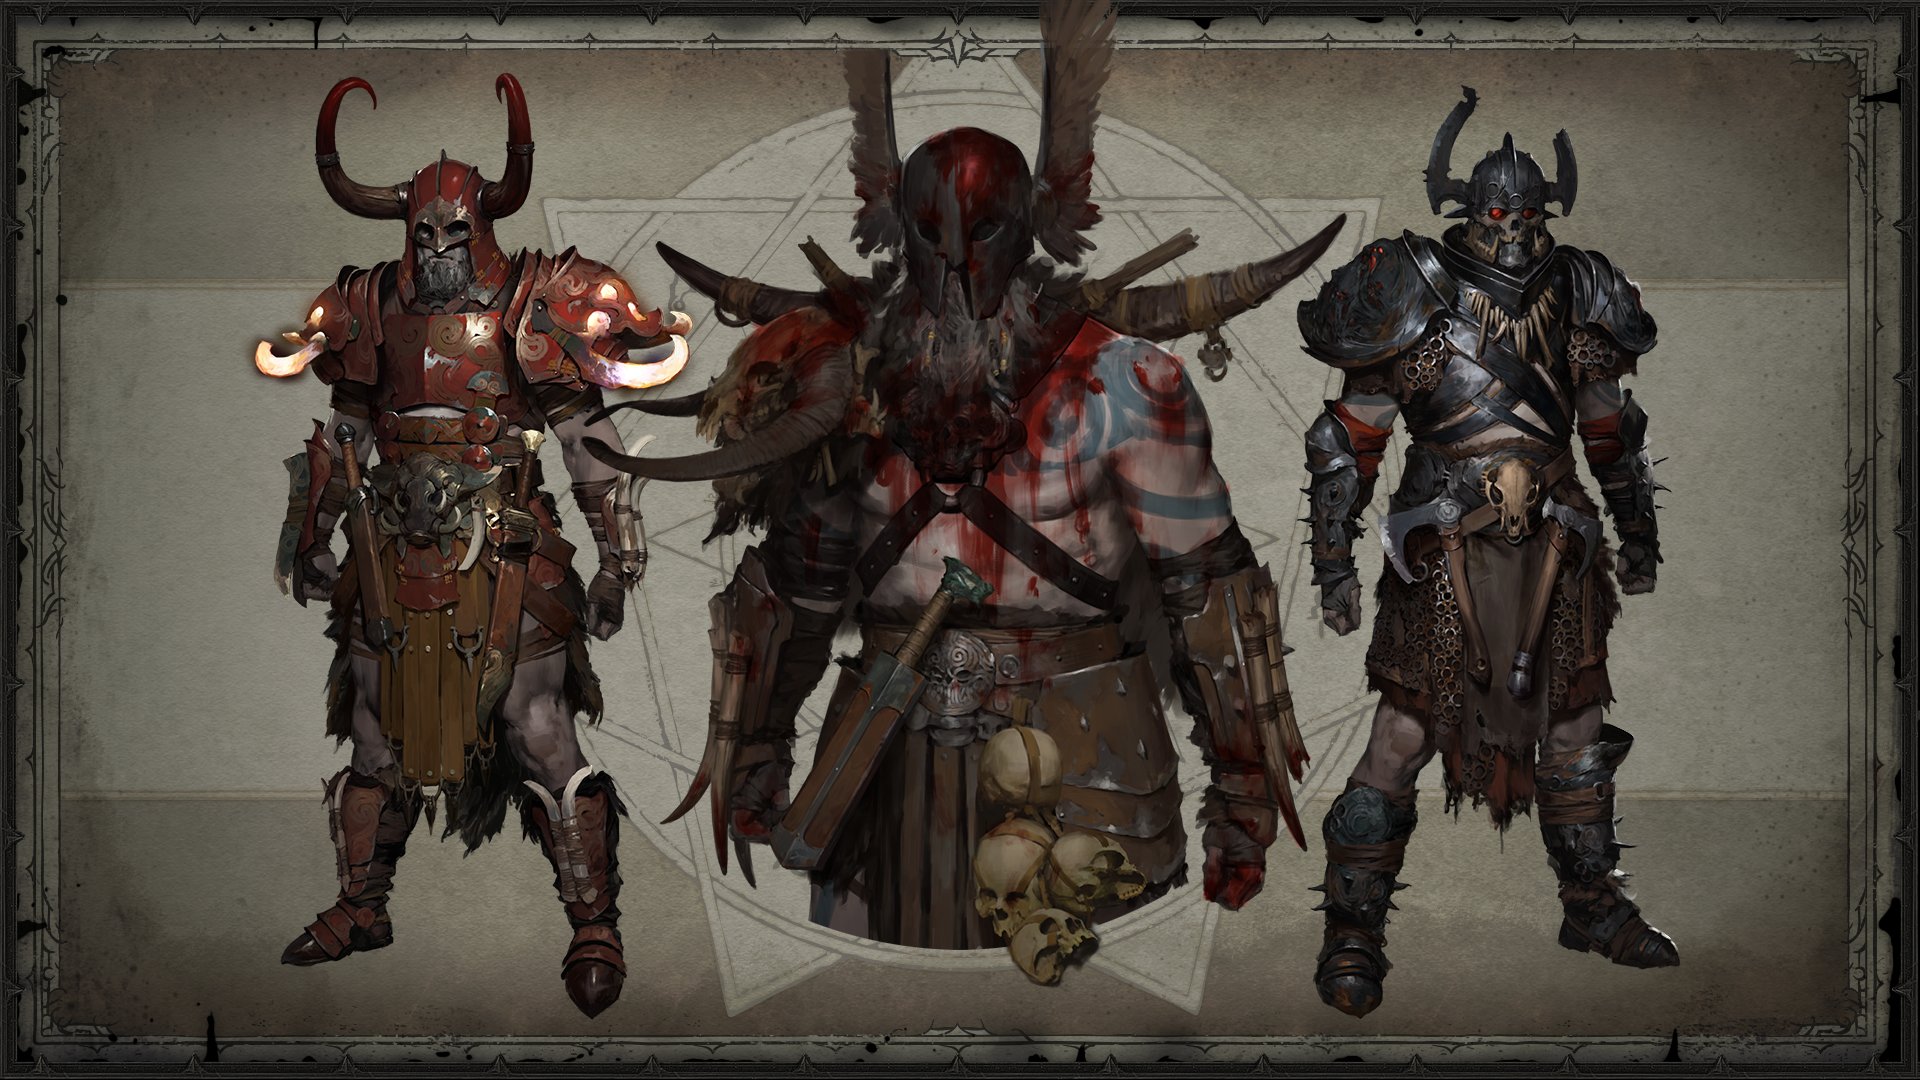 Diablo On Twitter Preview The Legendary Armor Concept Art For The Barbarian Sorceress And Druid